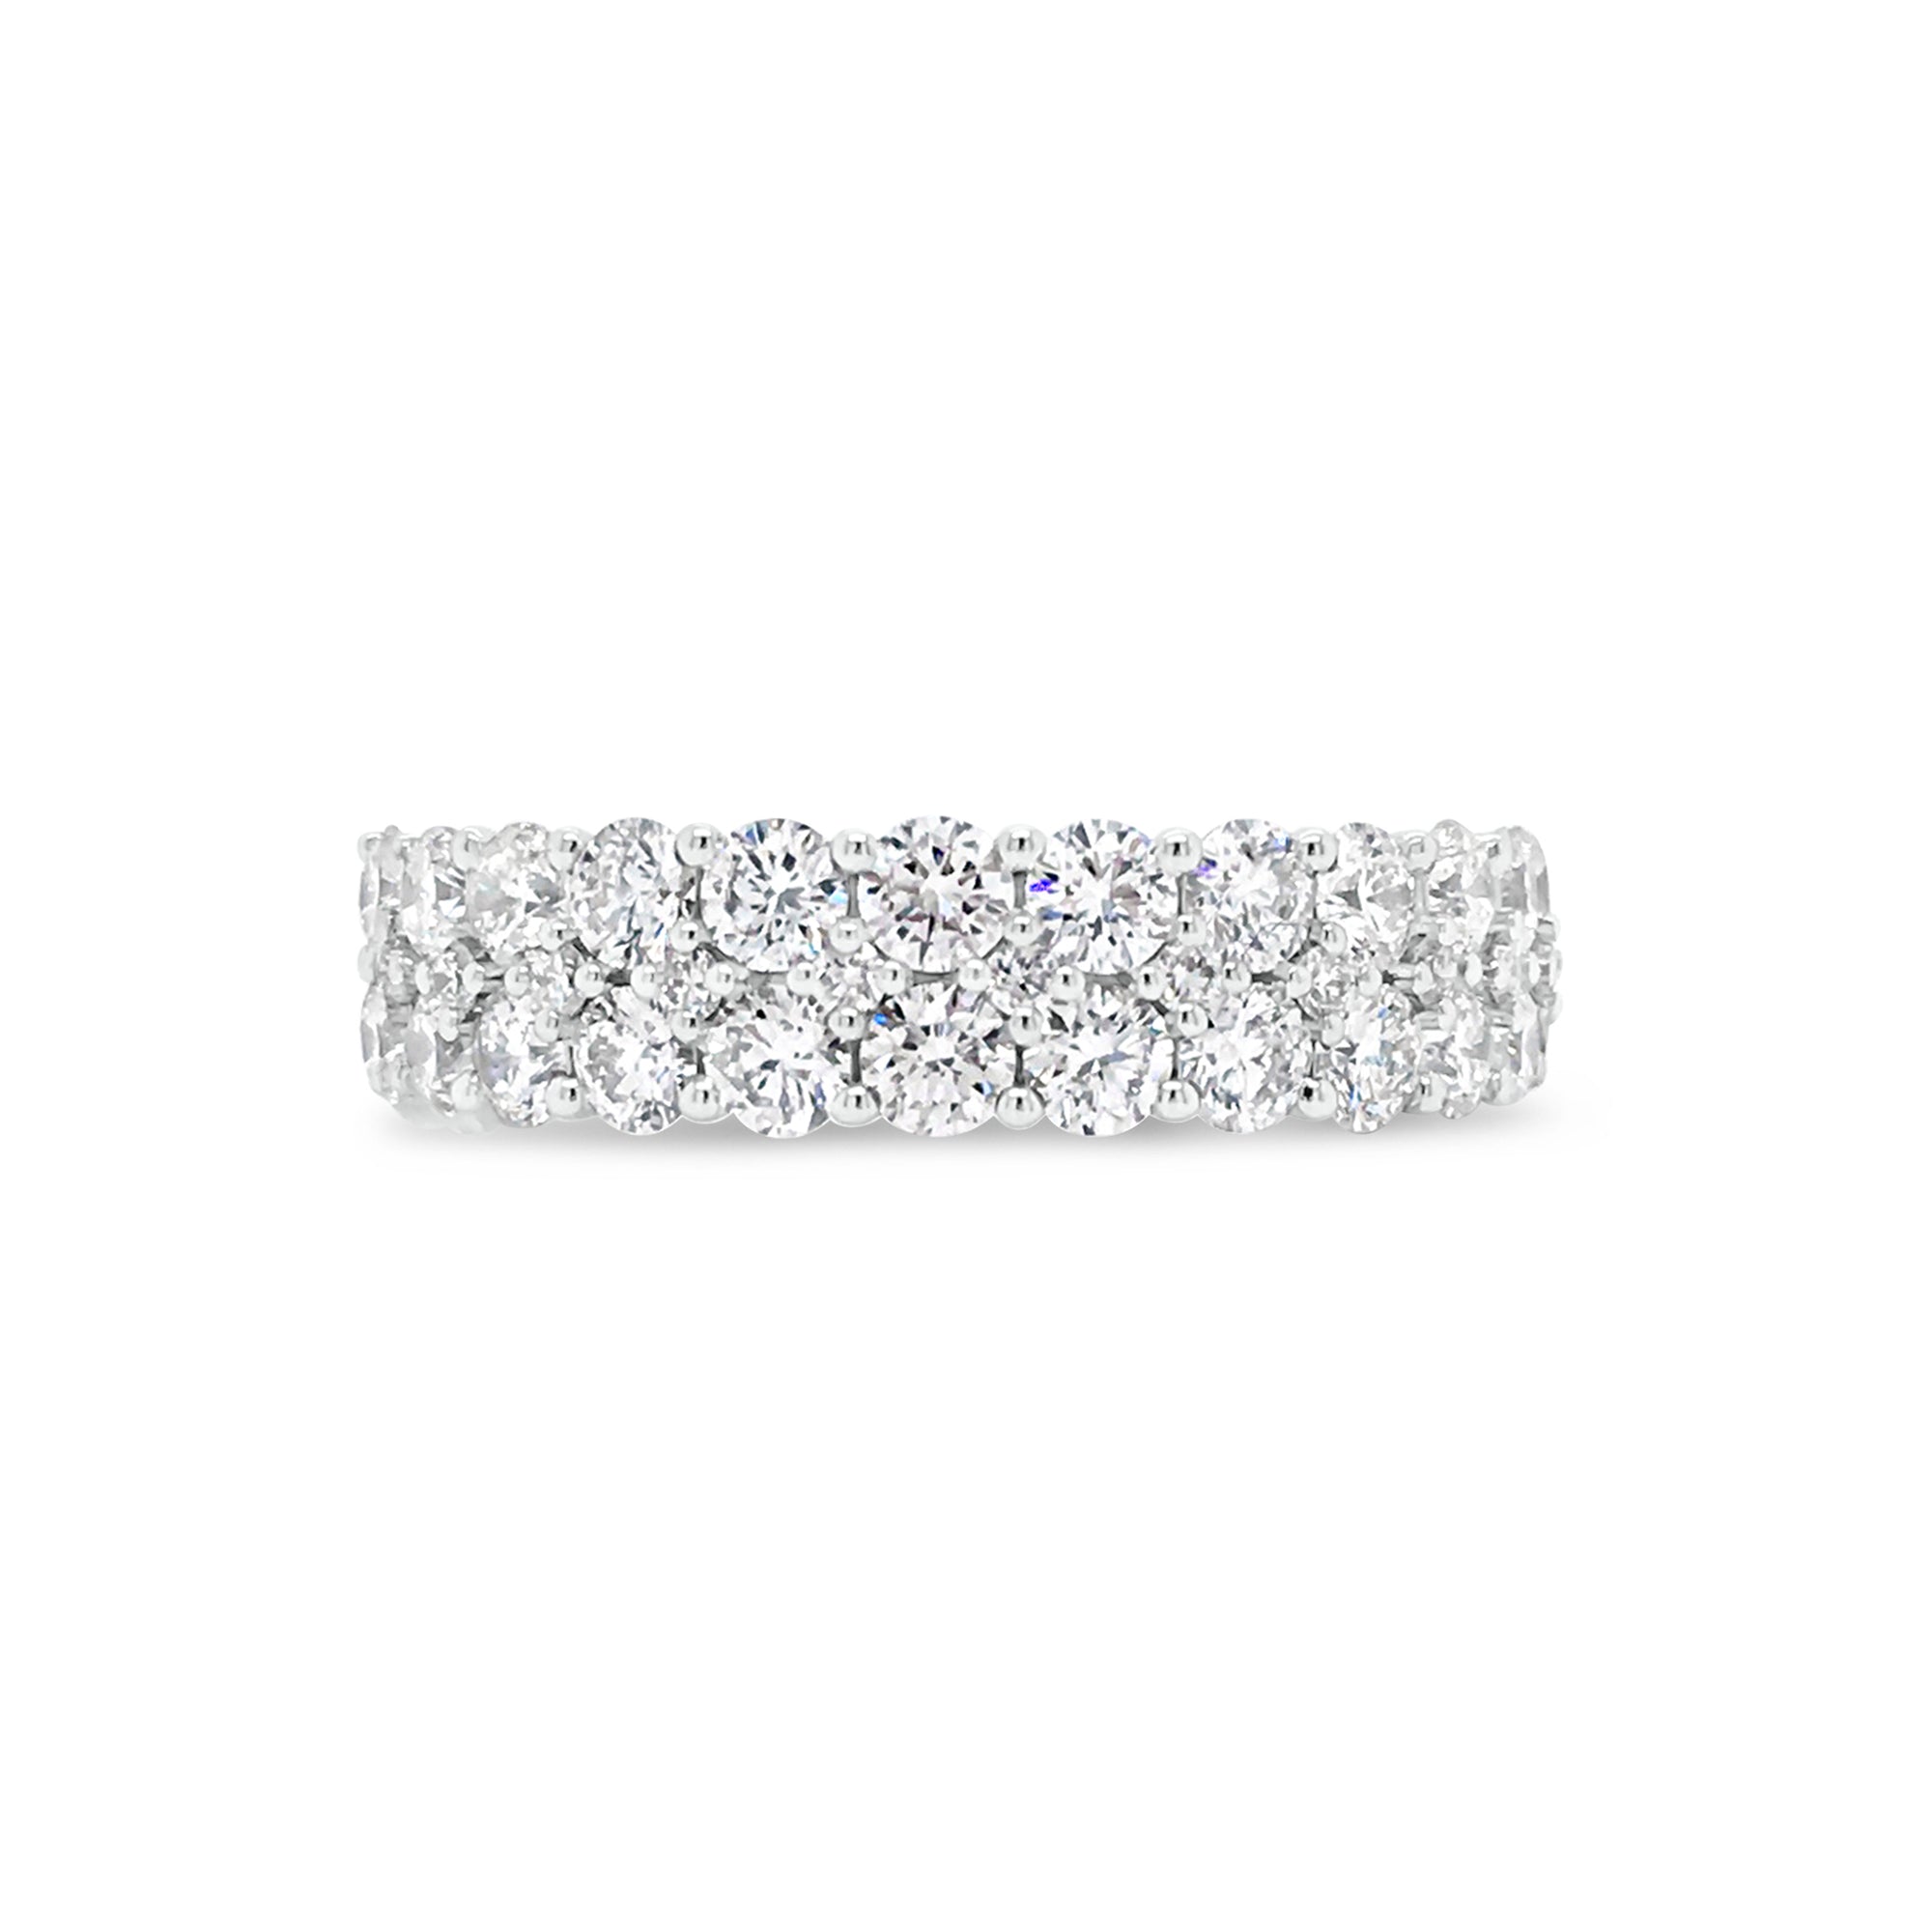 Double-Row 12 Stone Diamond Wedding Band  -18k gold weighing 4.60 grams  -24 round diamonds weighing 1.56 carats  -11 round diamonds weighing .10 carats